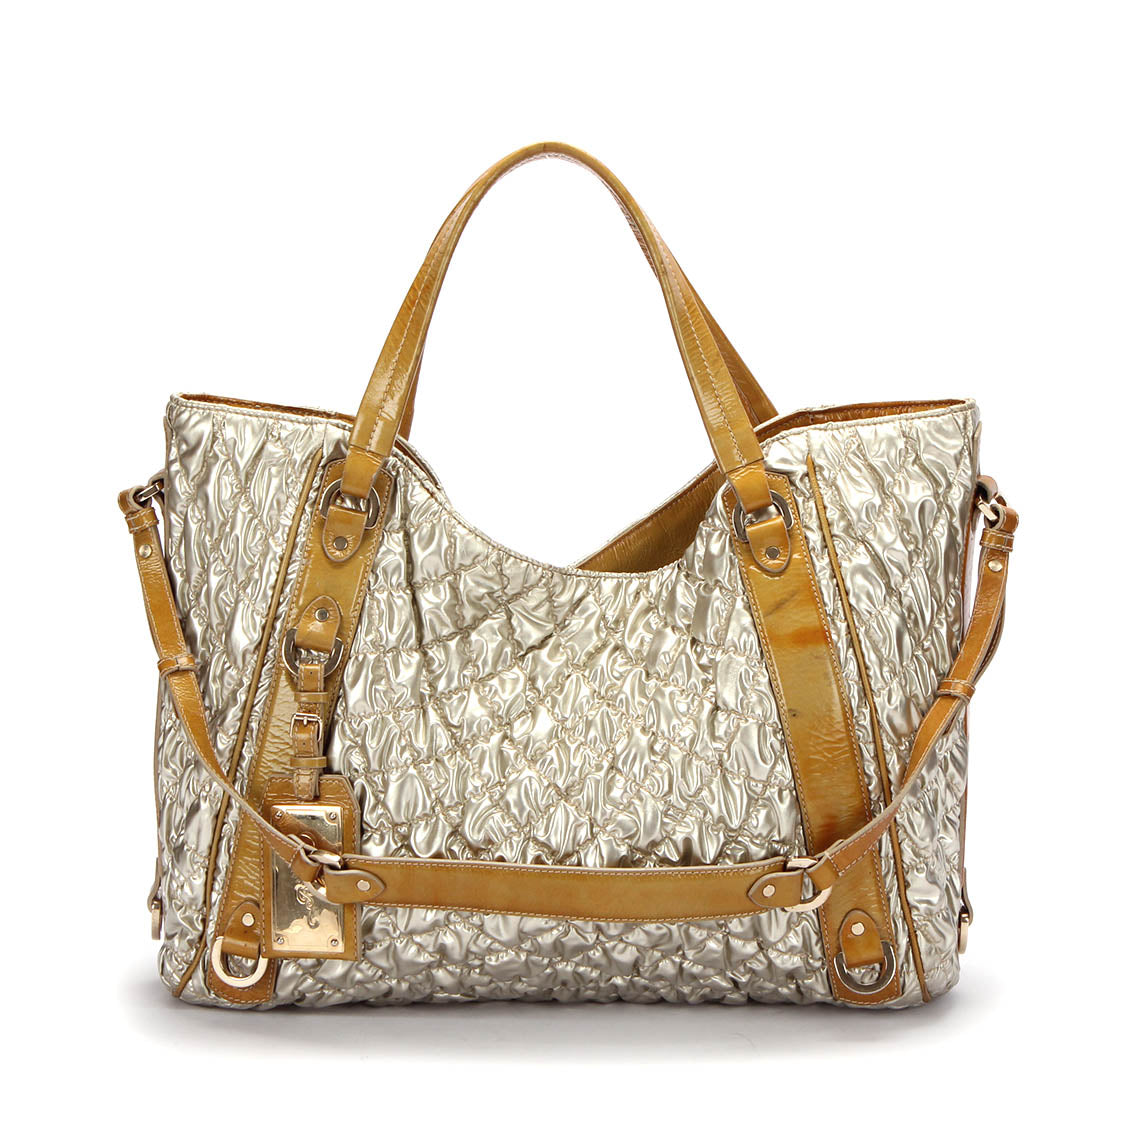 Metallic Quilted Leather Tote Bag